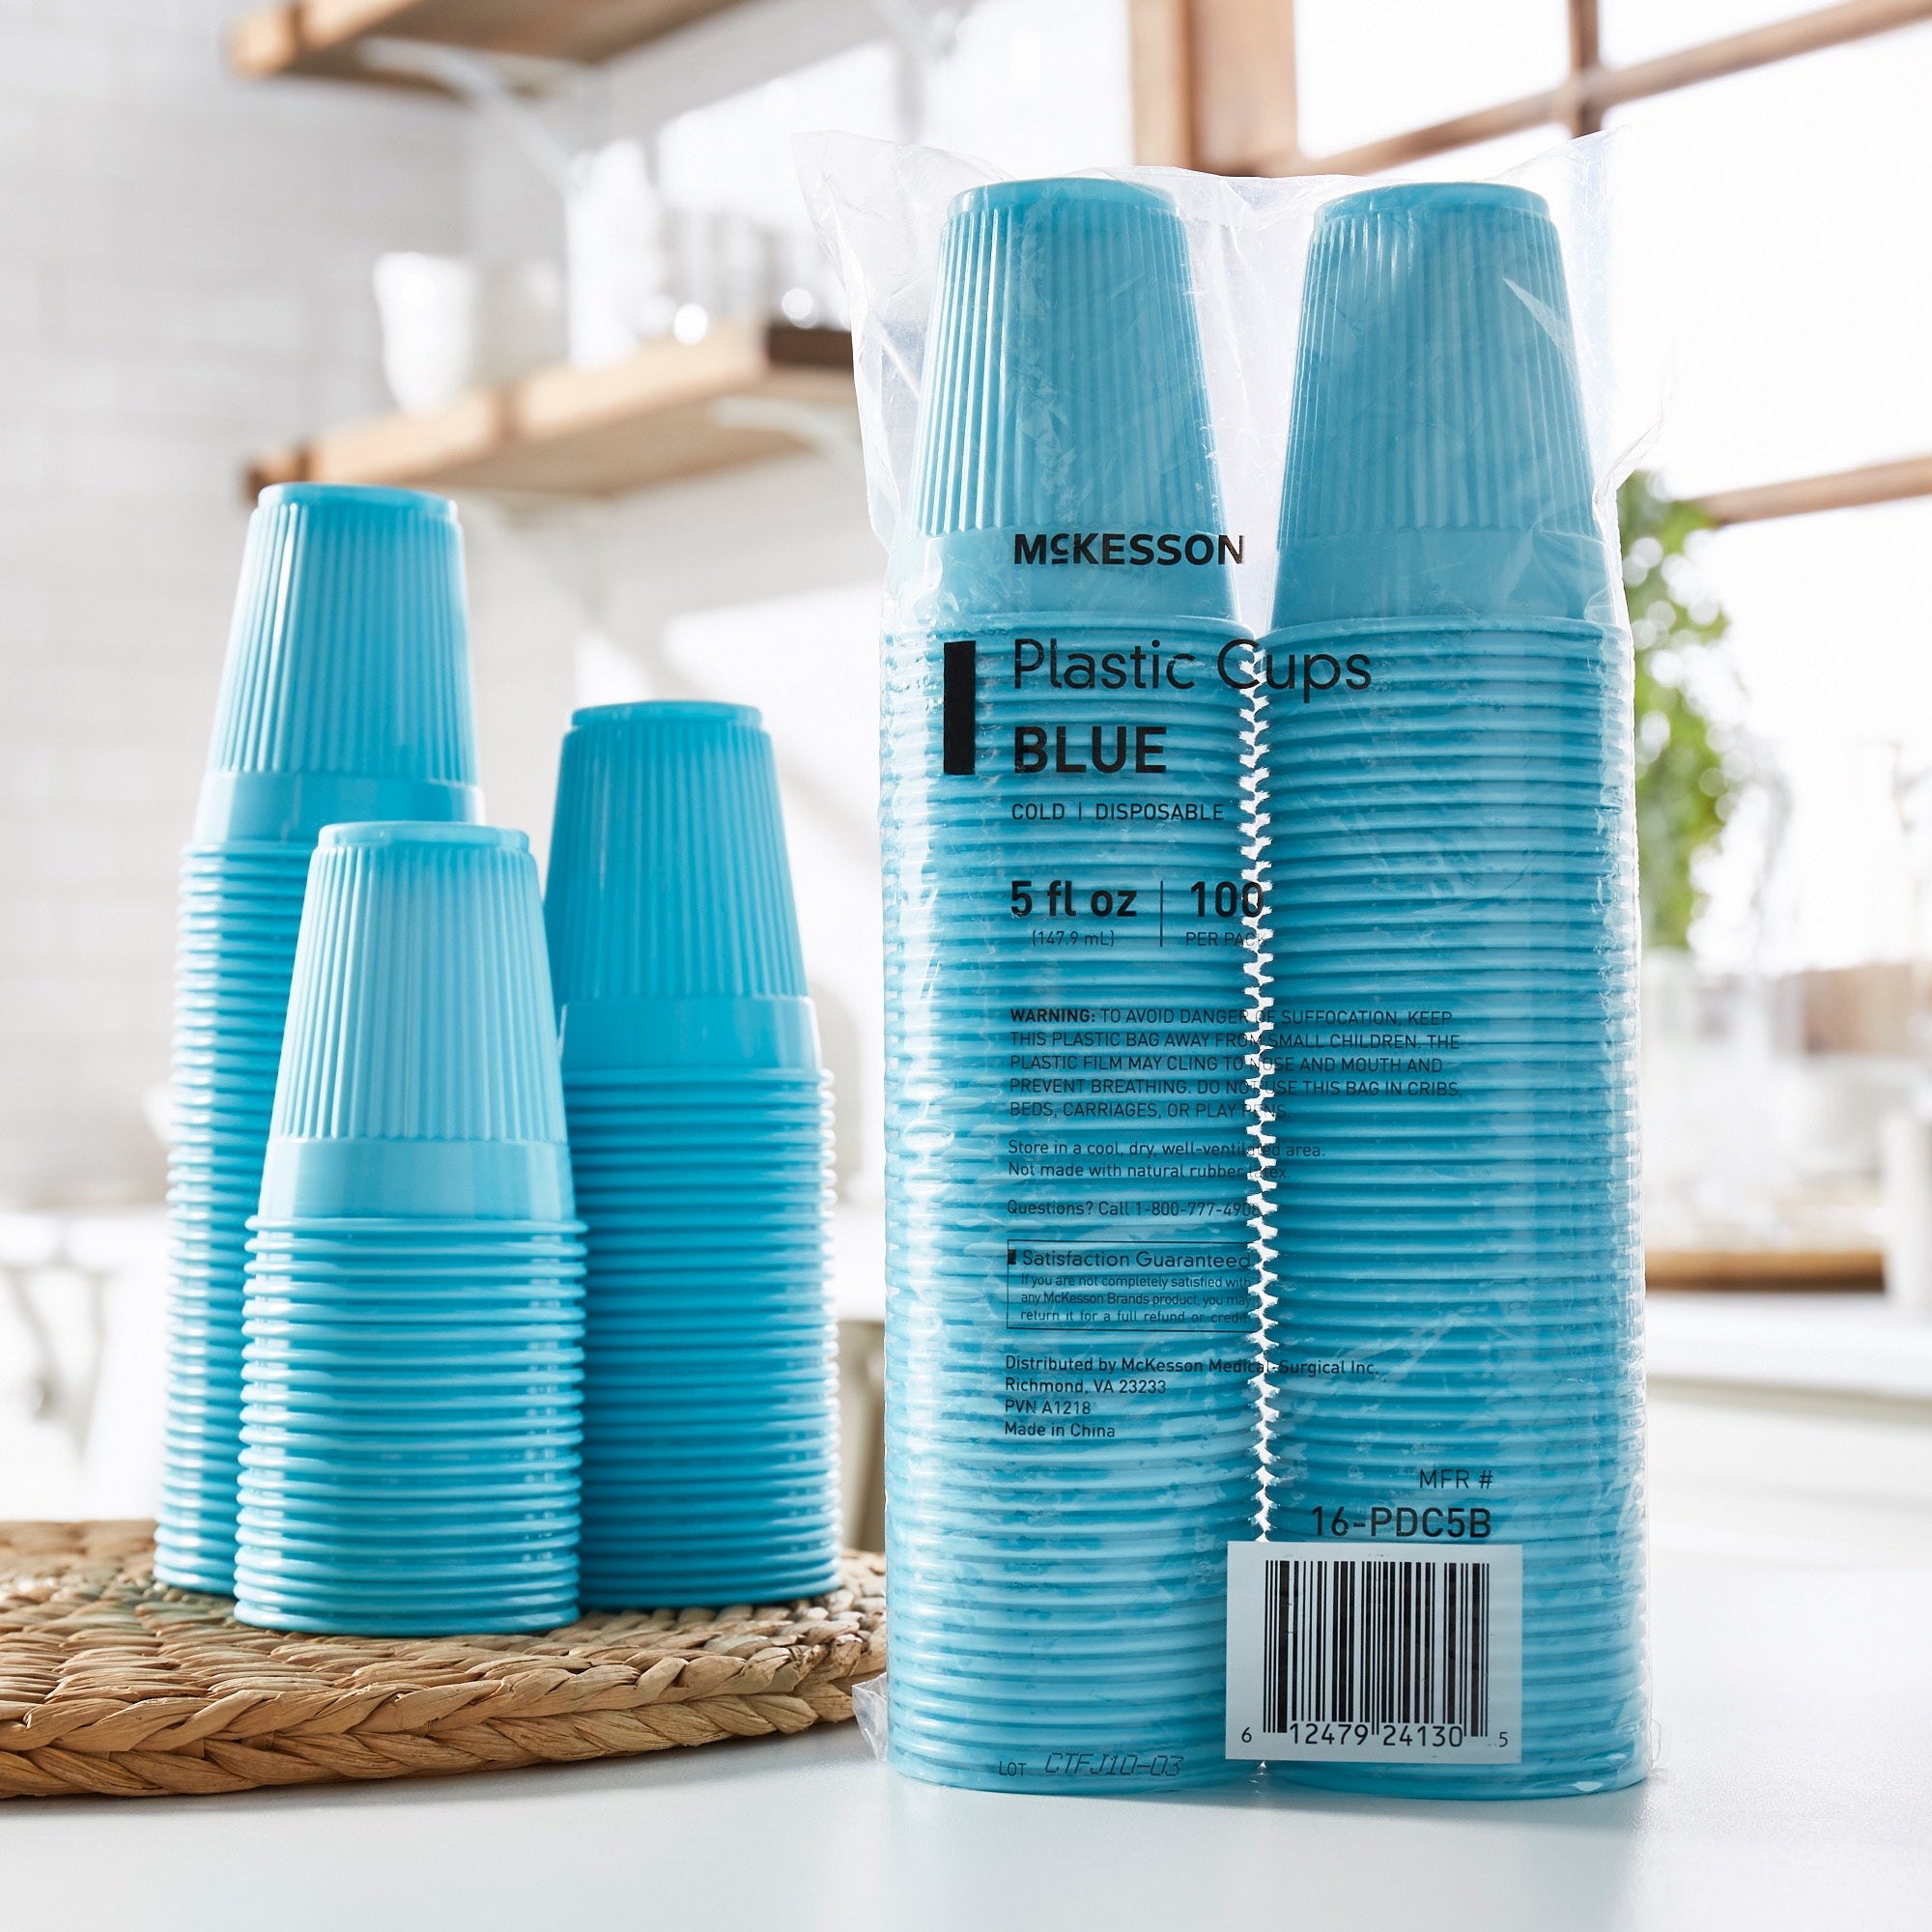 McKesson Blue Polypropylene 5 oz Drinking Cups - Disposable & Durable (100 Pack)